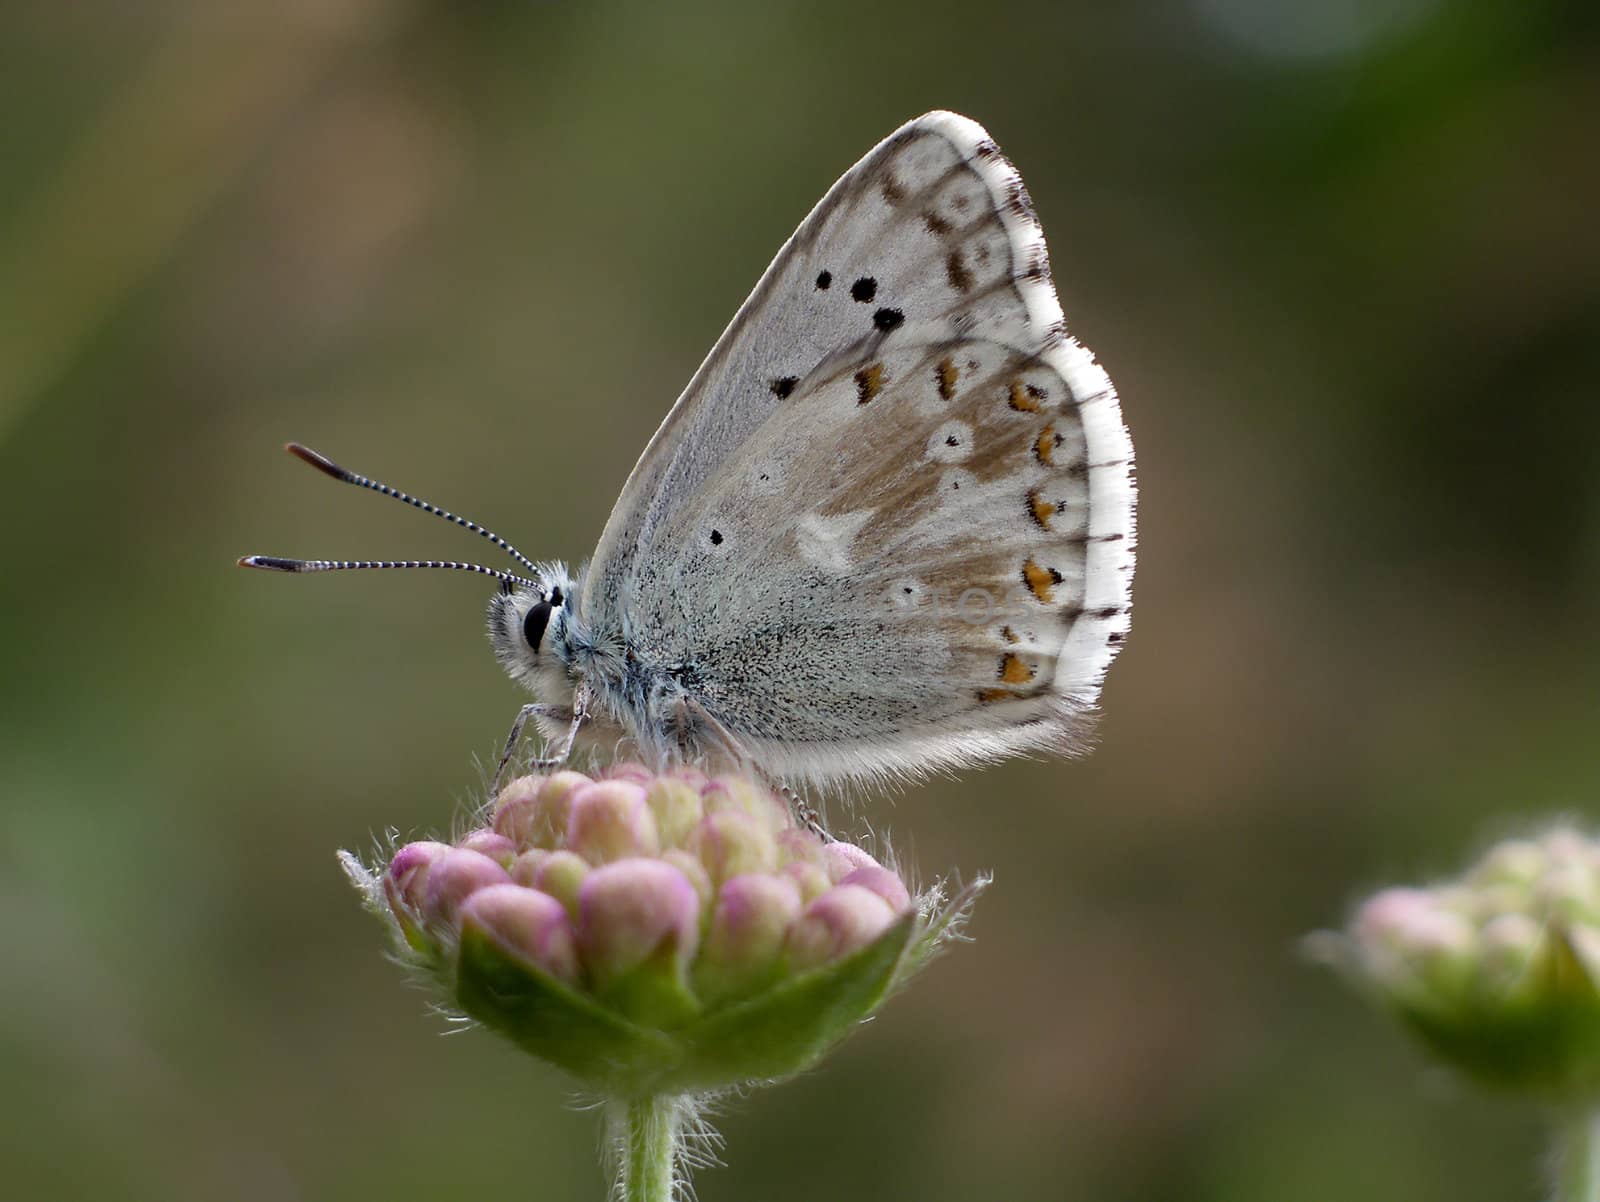 Close view of a butterfly (Lysandra coridon) on a flower